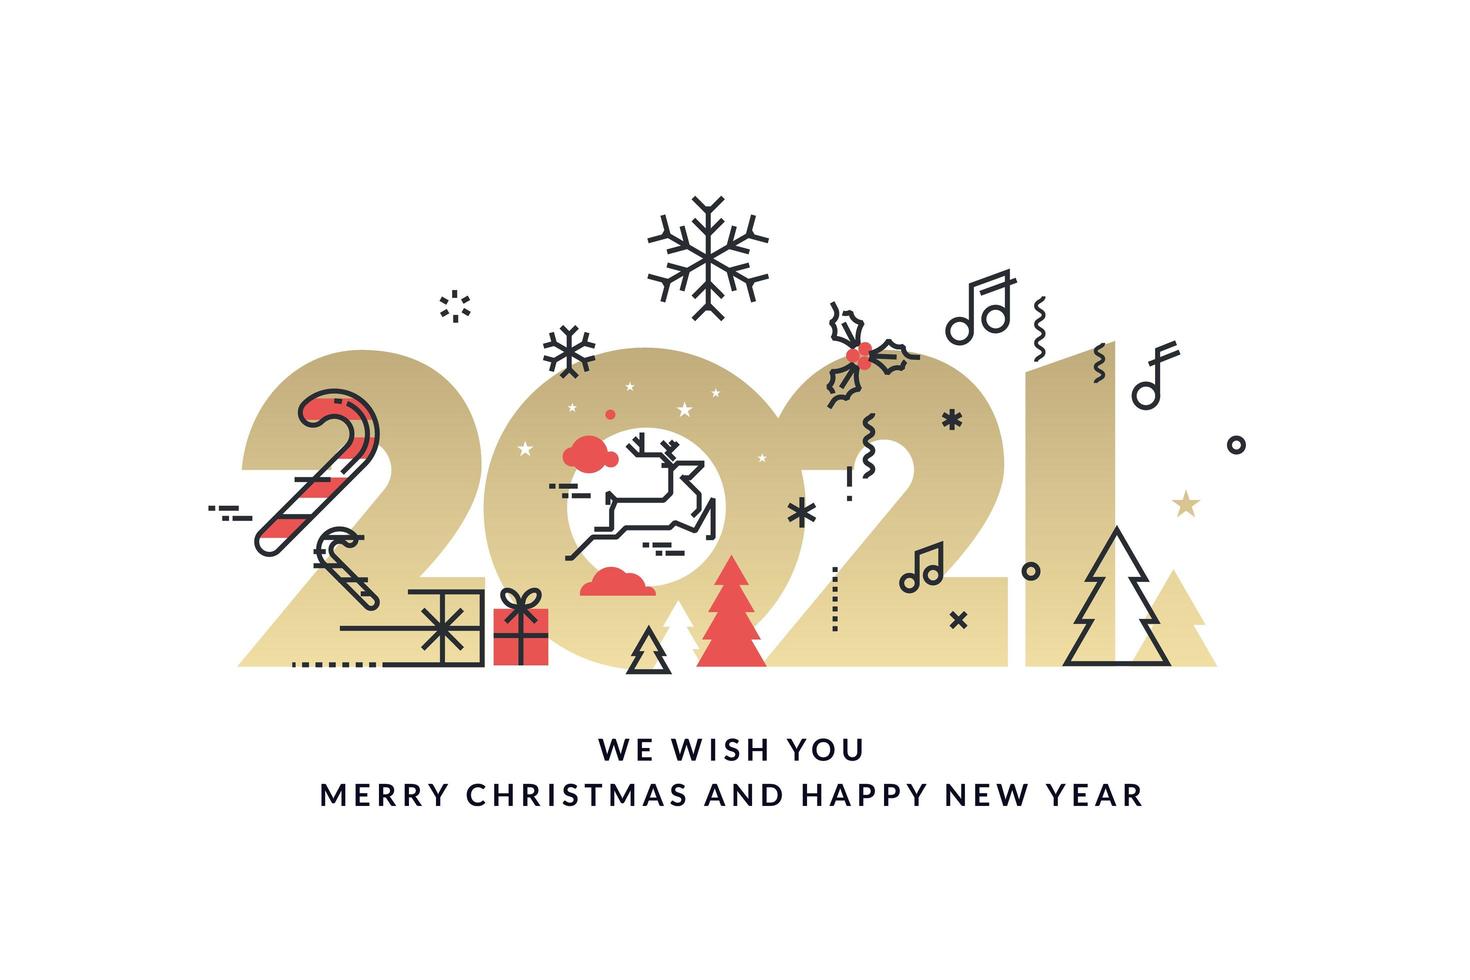 Merry Christmas and Happy New Year 2021 Card Free Vectors, Clipart Graphics & Vector Art